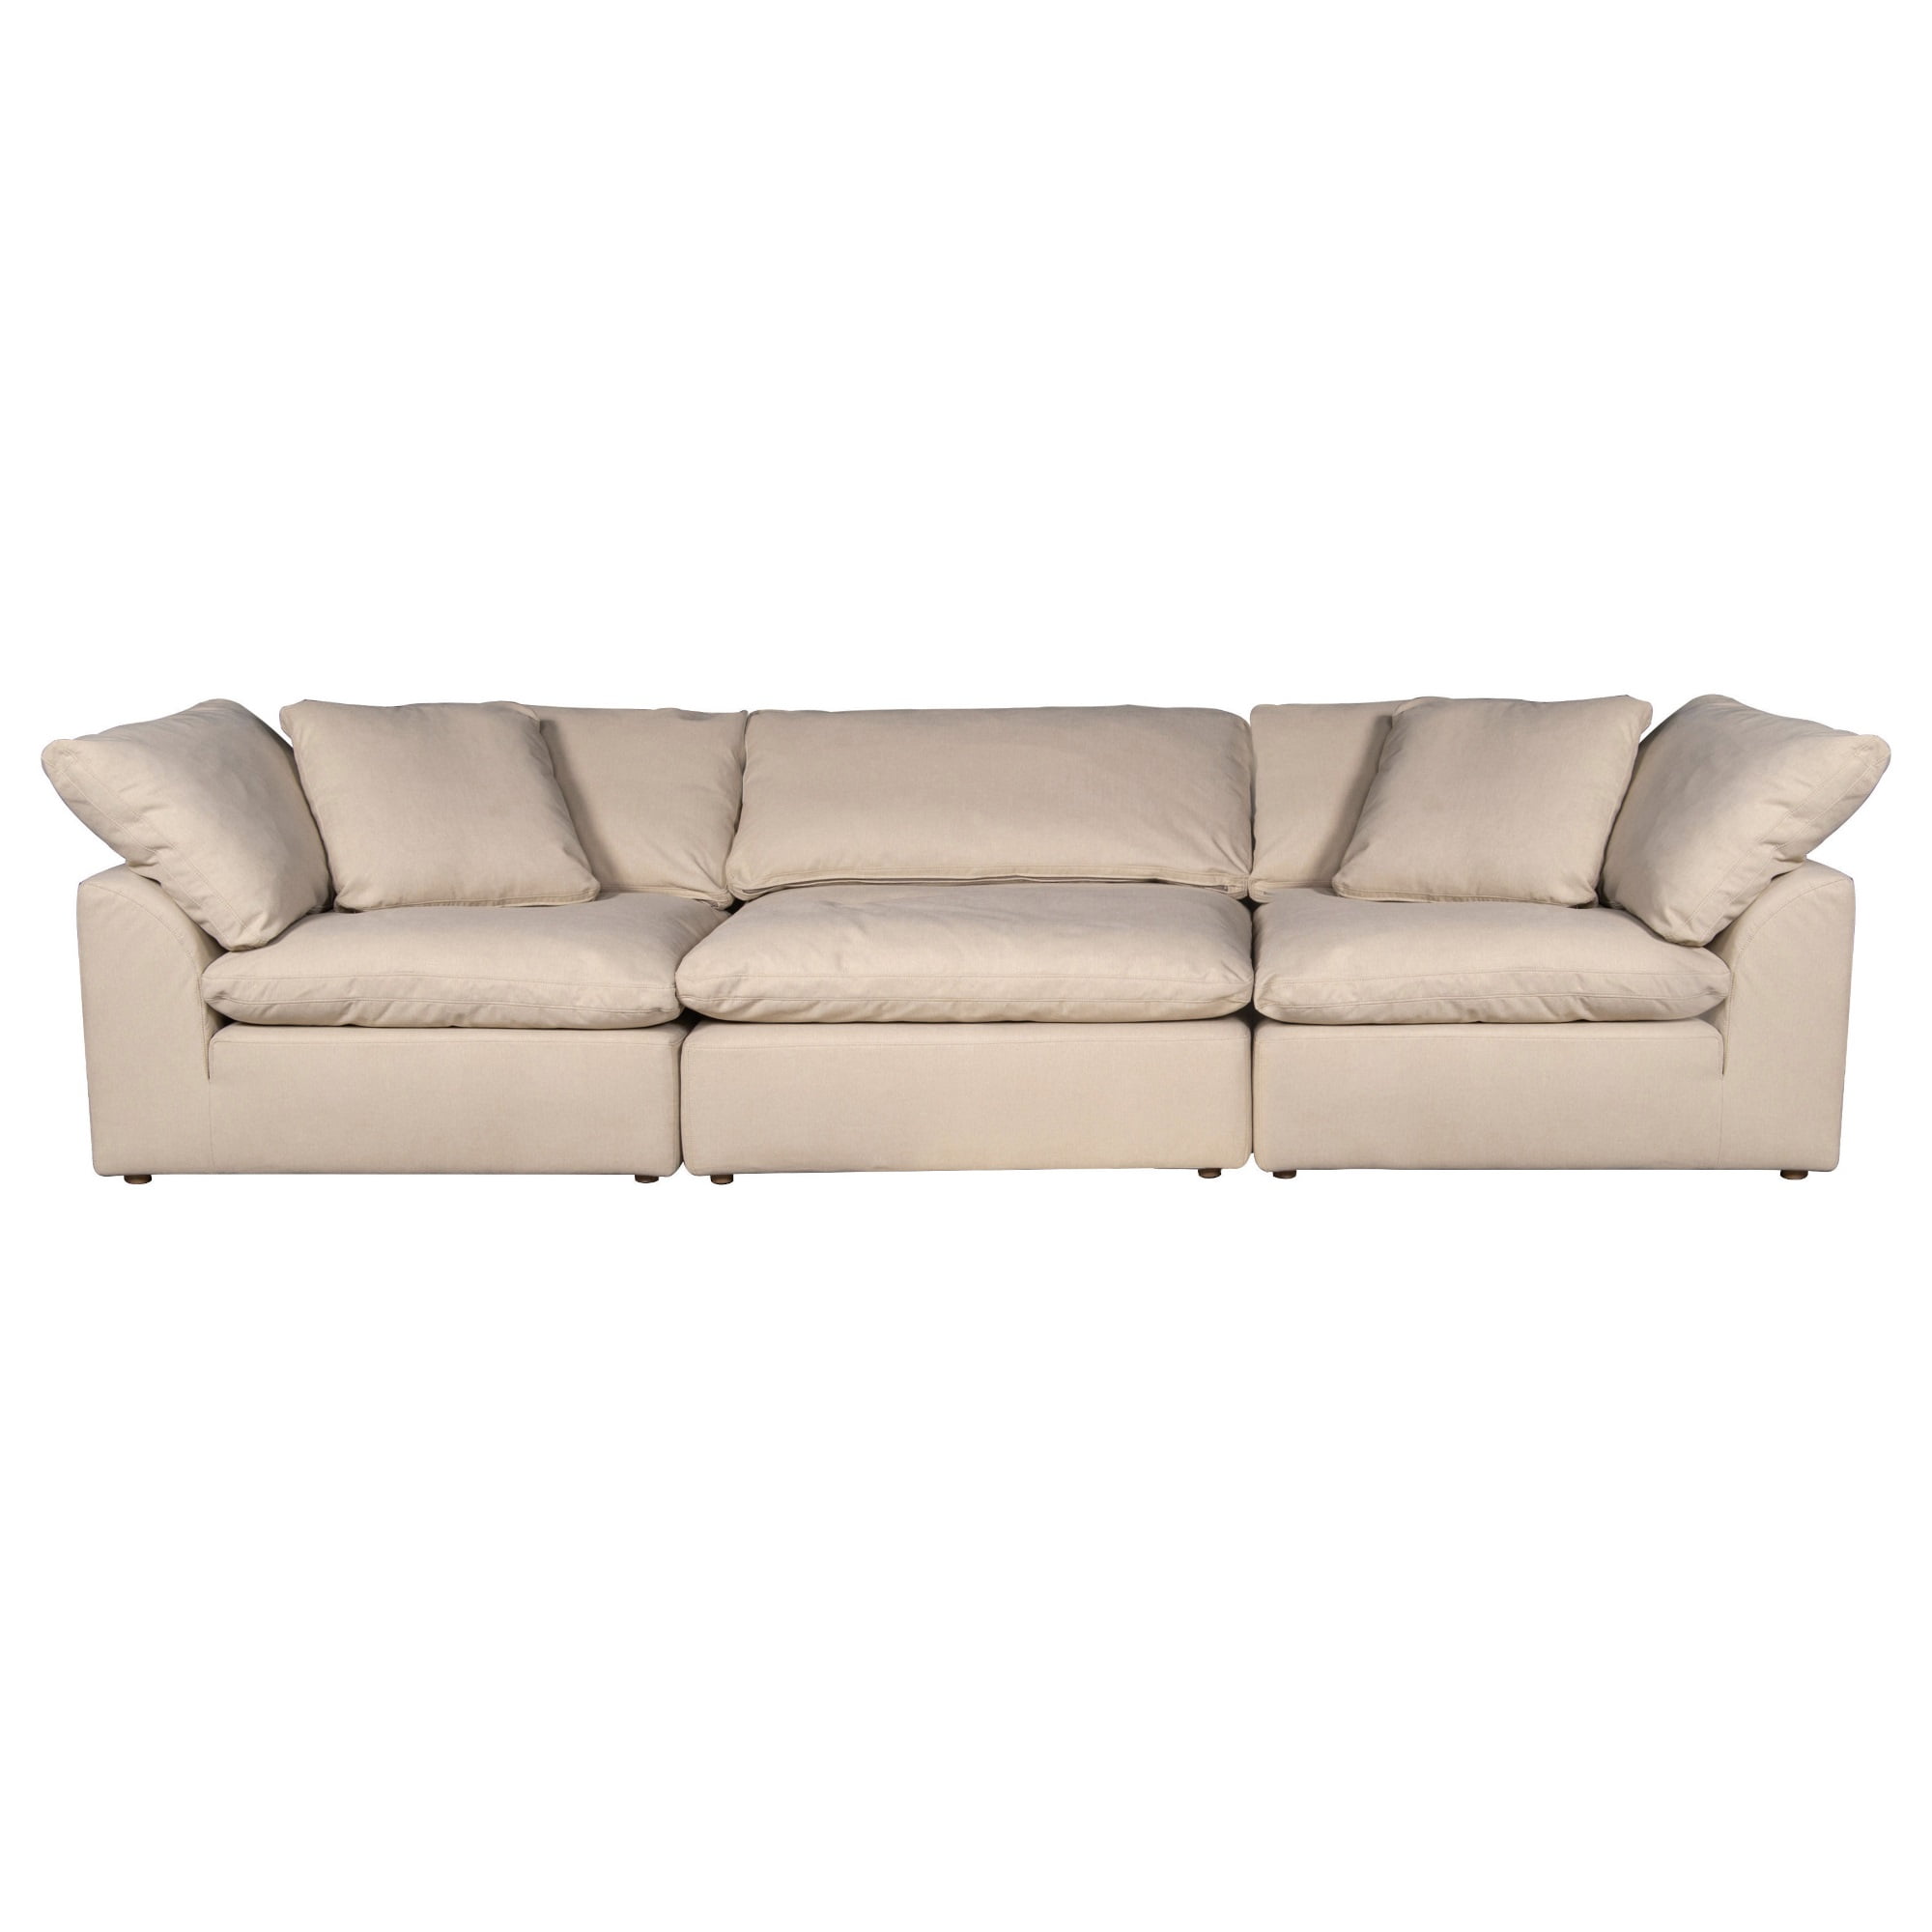 Deep Seating Down Filled Couch